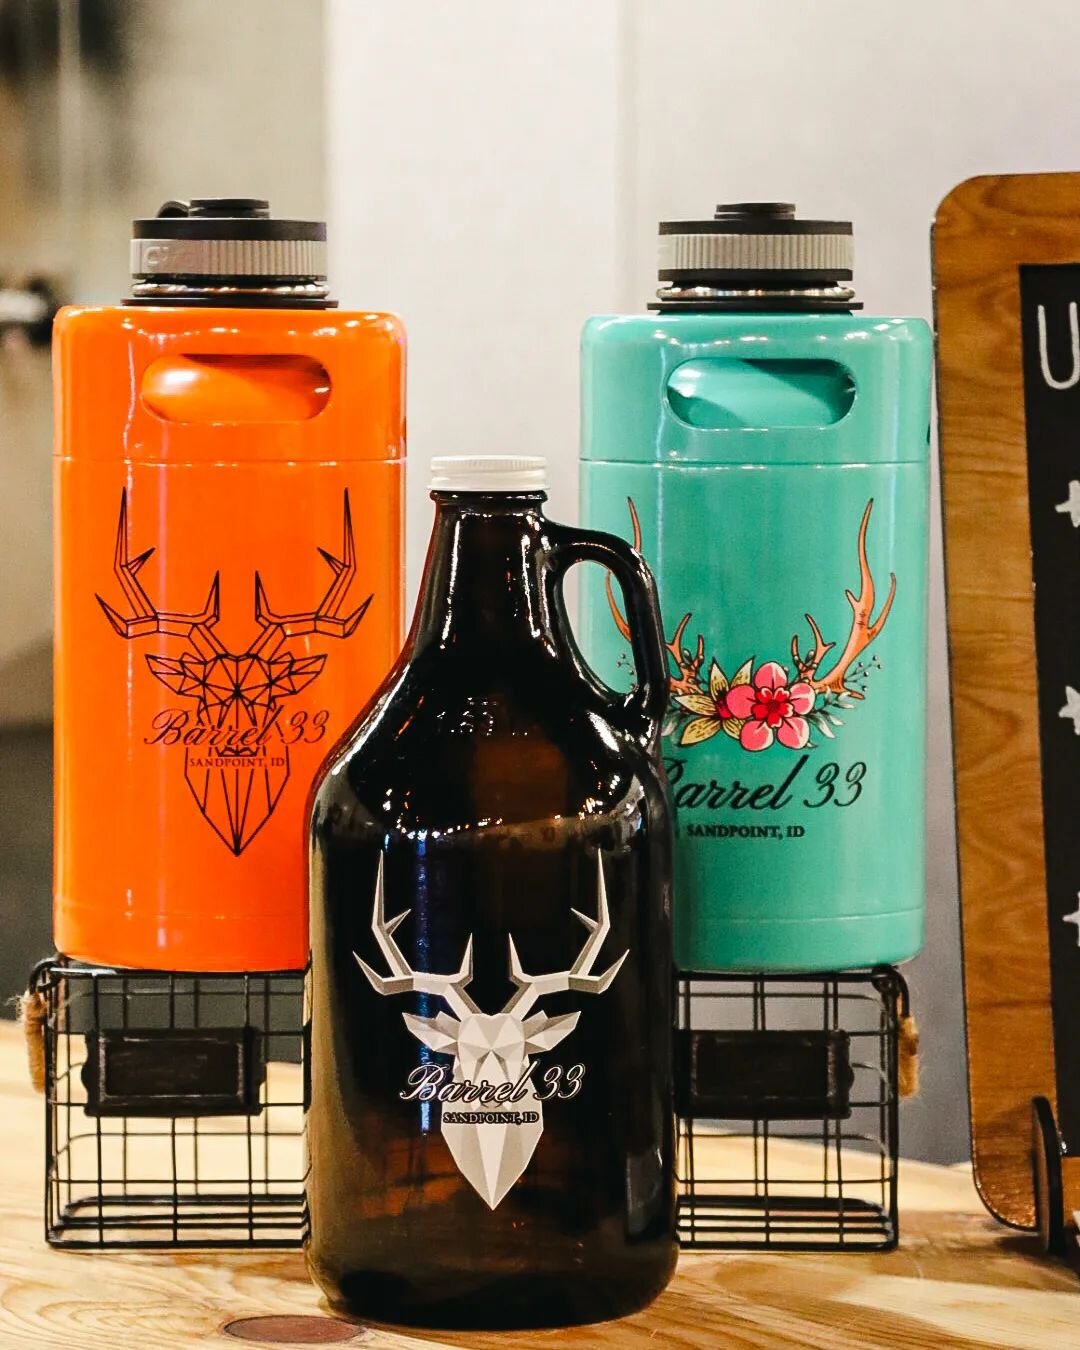 Did you know we also have great gift options? Check out our mini kegs, comes with a fill of beer! We also have growlers available to go.

Come see our selection of gifts, 15%% off wine caddies! Cheers!